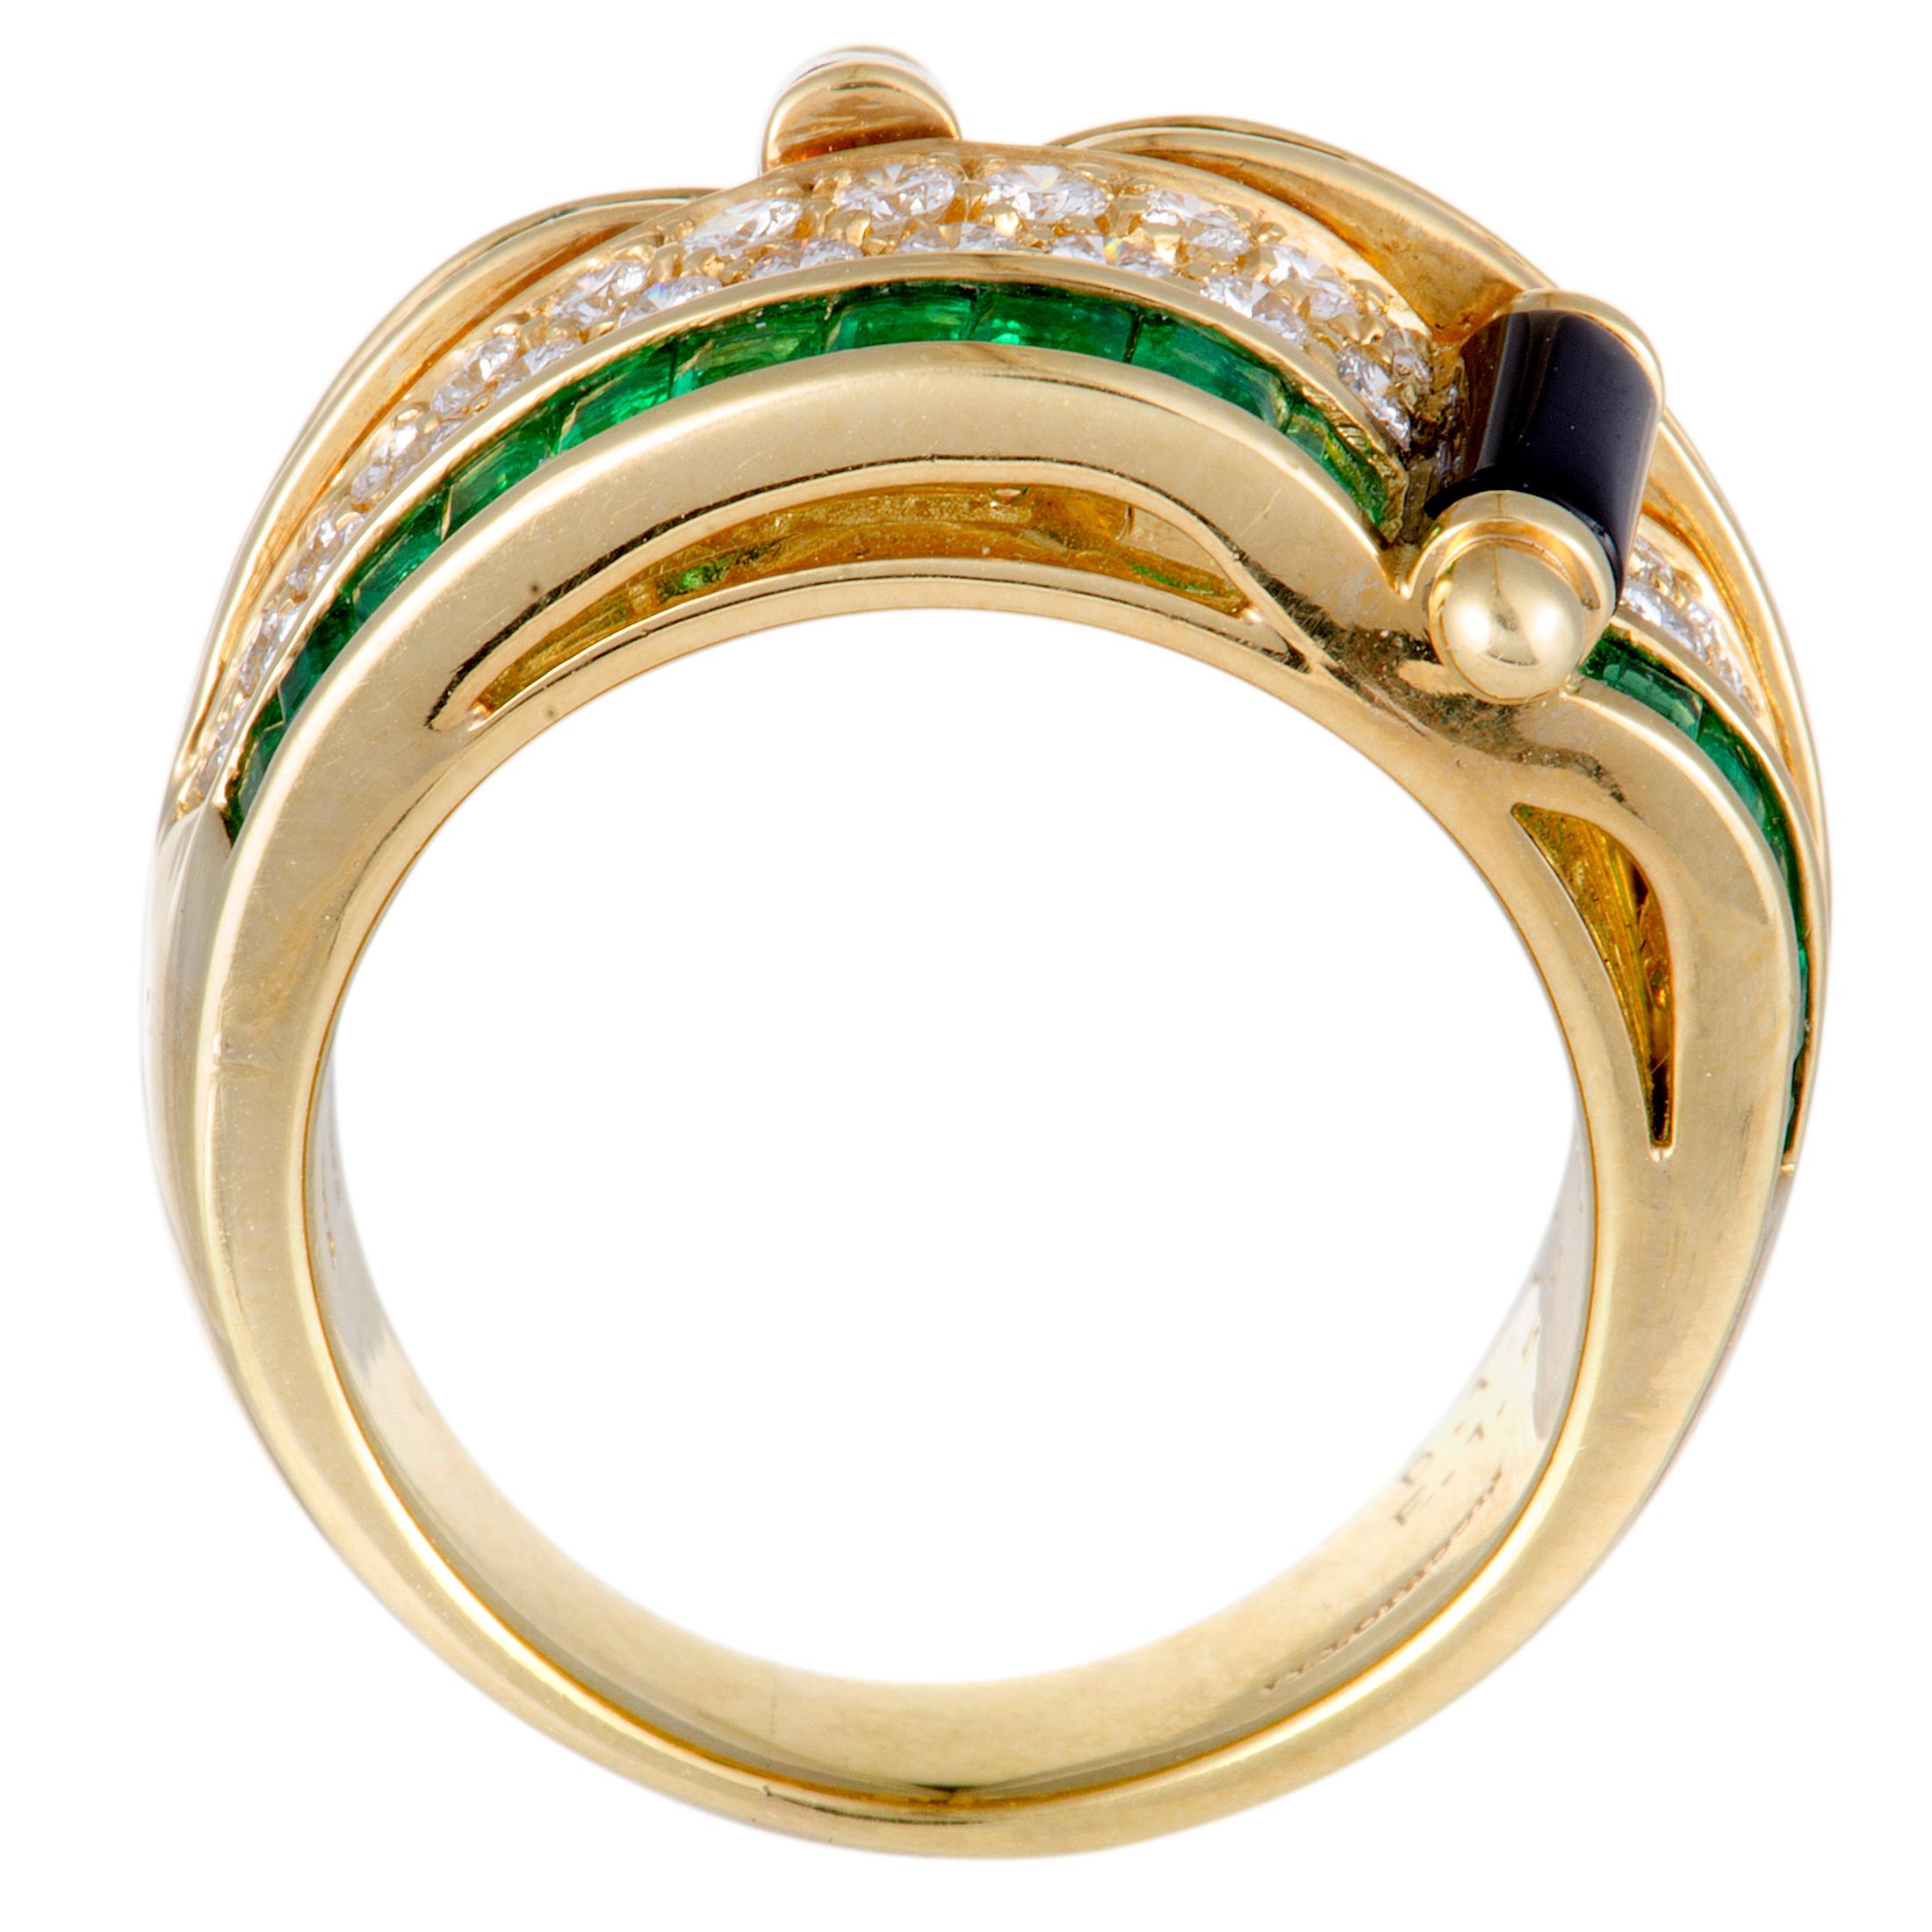 Expertly set with a most prestigious blend of eye-catching gems, this fabulous 18K yellow gold ring from Picchiotti will elevate your style in an exceptionally extravagant manner. The ring is decorated with striking onyx stones, and with emeralds